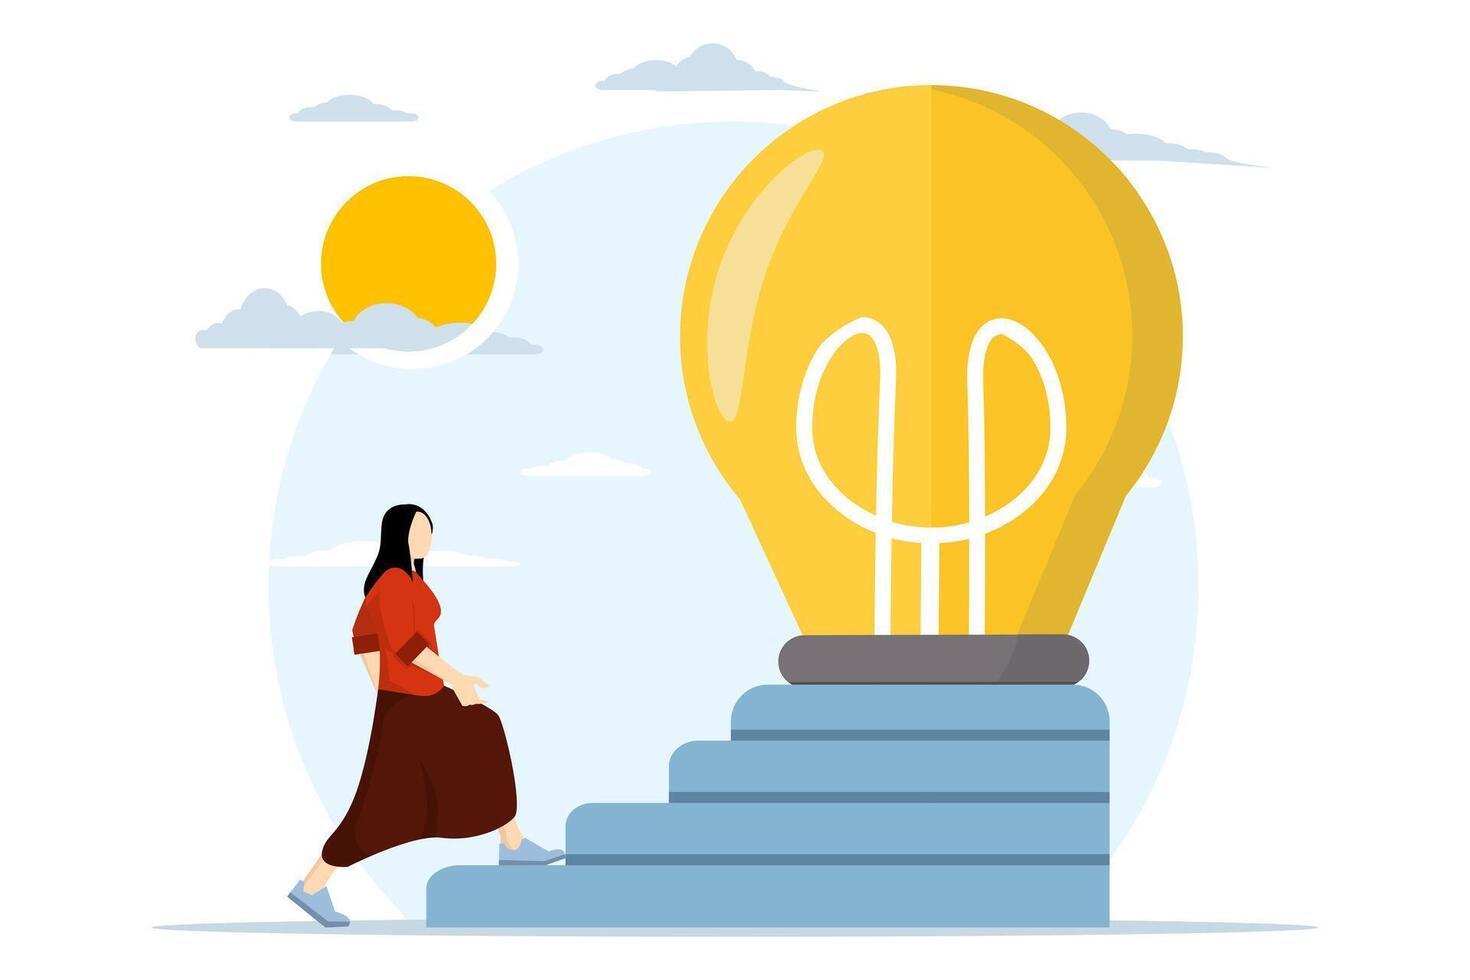 Creativity concept for business ideas, career path or goal achievement, thinking and brainstorming for new ideas or opportunities. business people are starting to climb the ladder to big ideas. vector